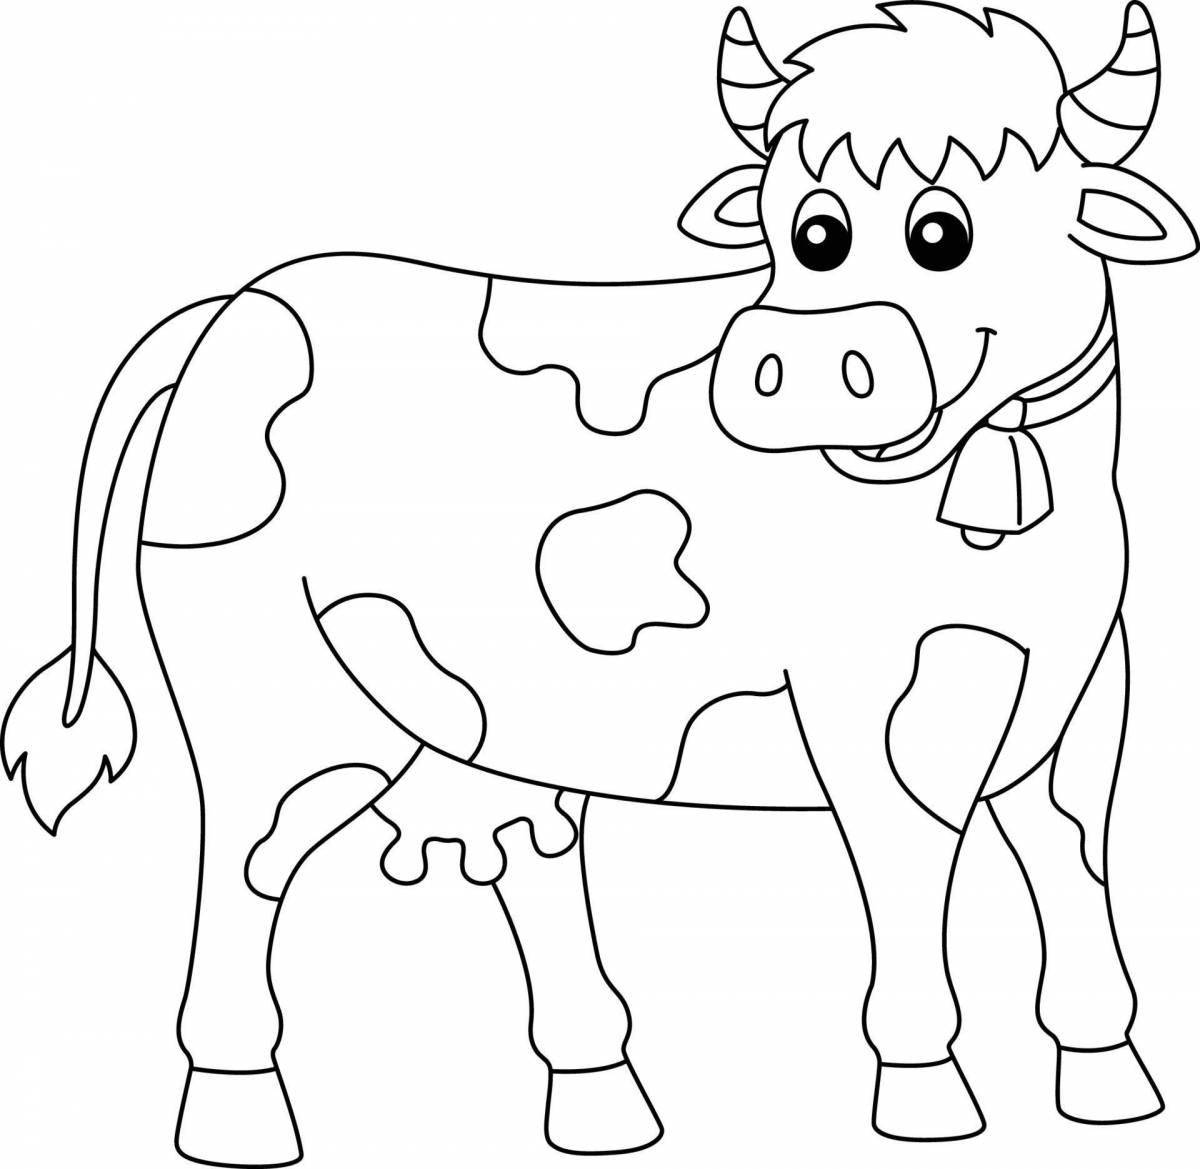 Glittering cow coloring book for children 3-4 years old